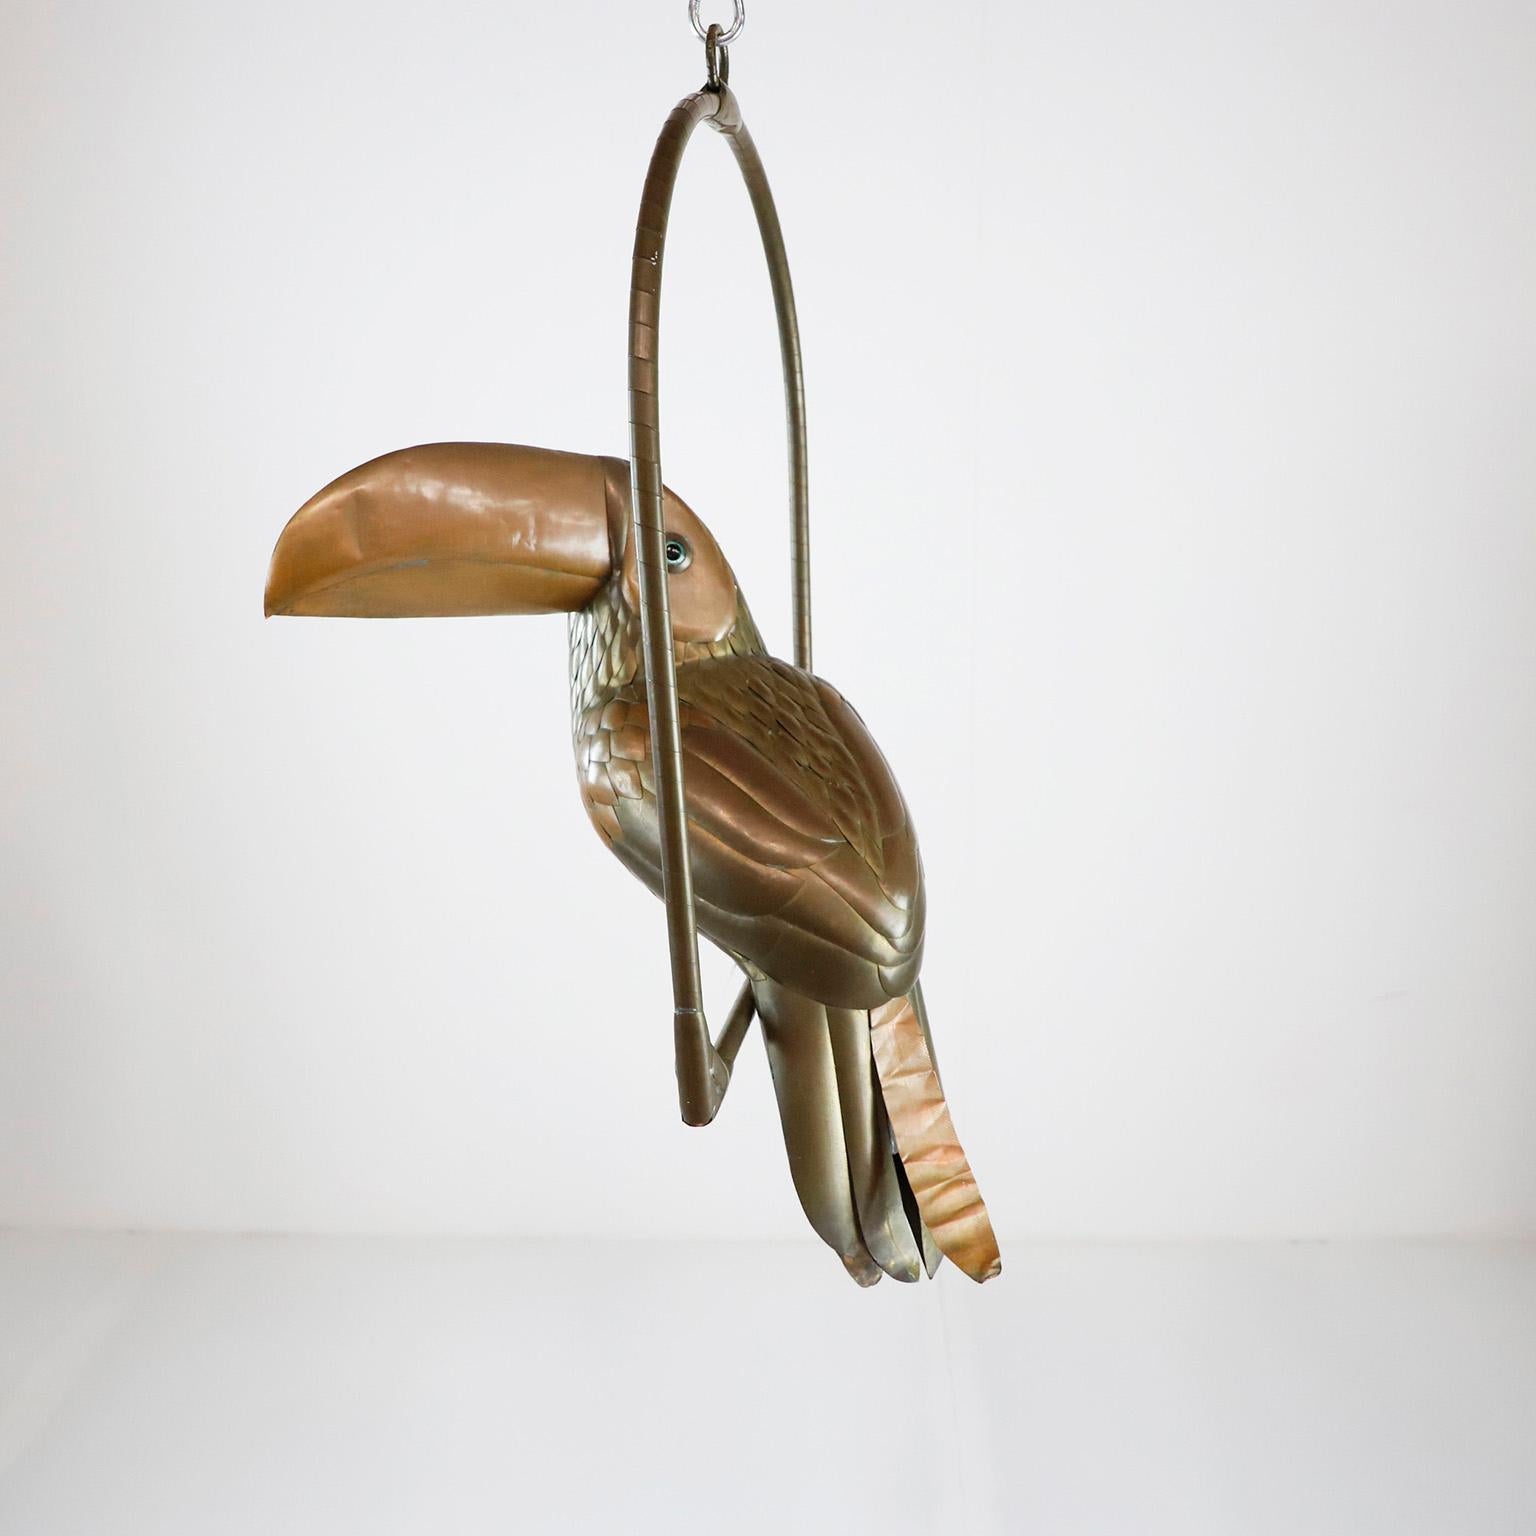 We offer this toucan sculpture by Mexican artist Sergio Bustamante, circa 1960 made in brass and copper with fantastic patina. Present some details on the tail feathers and some on the body.